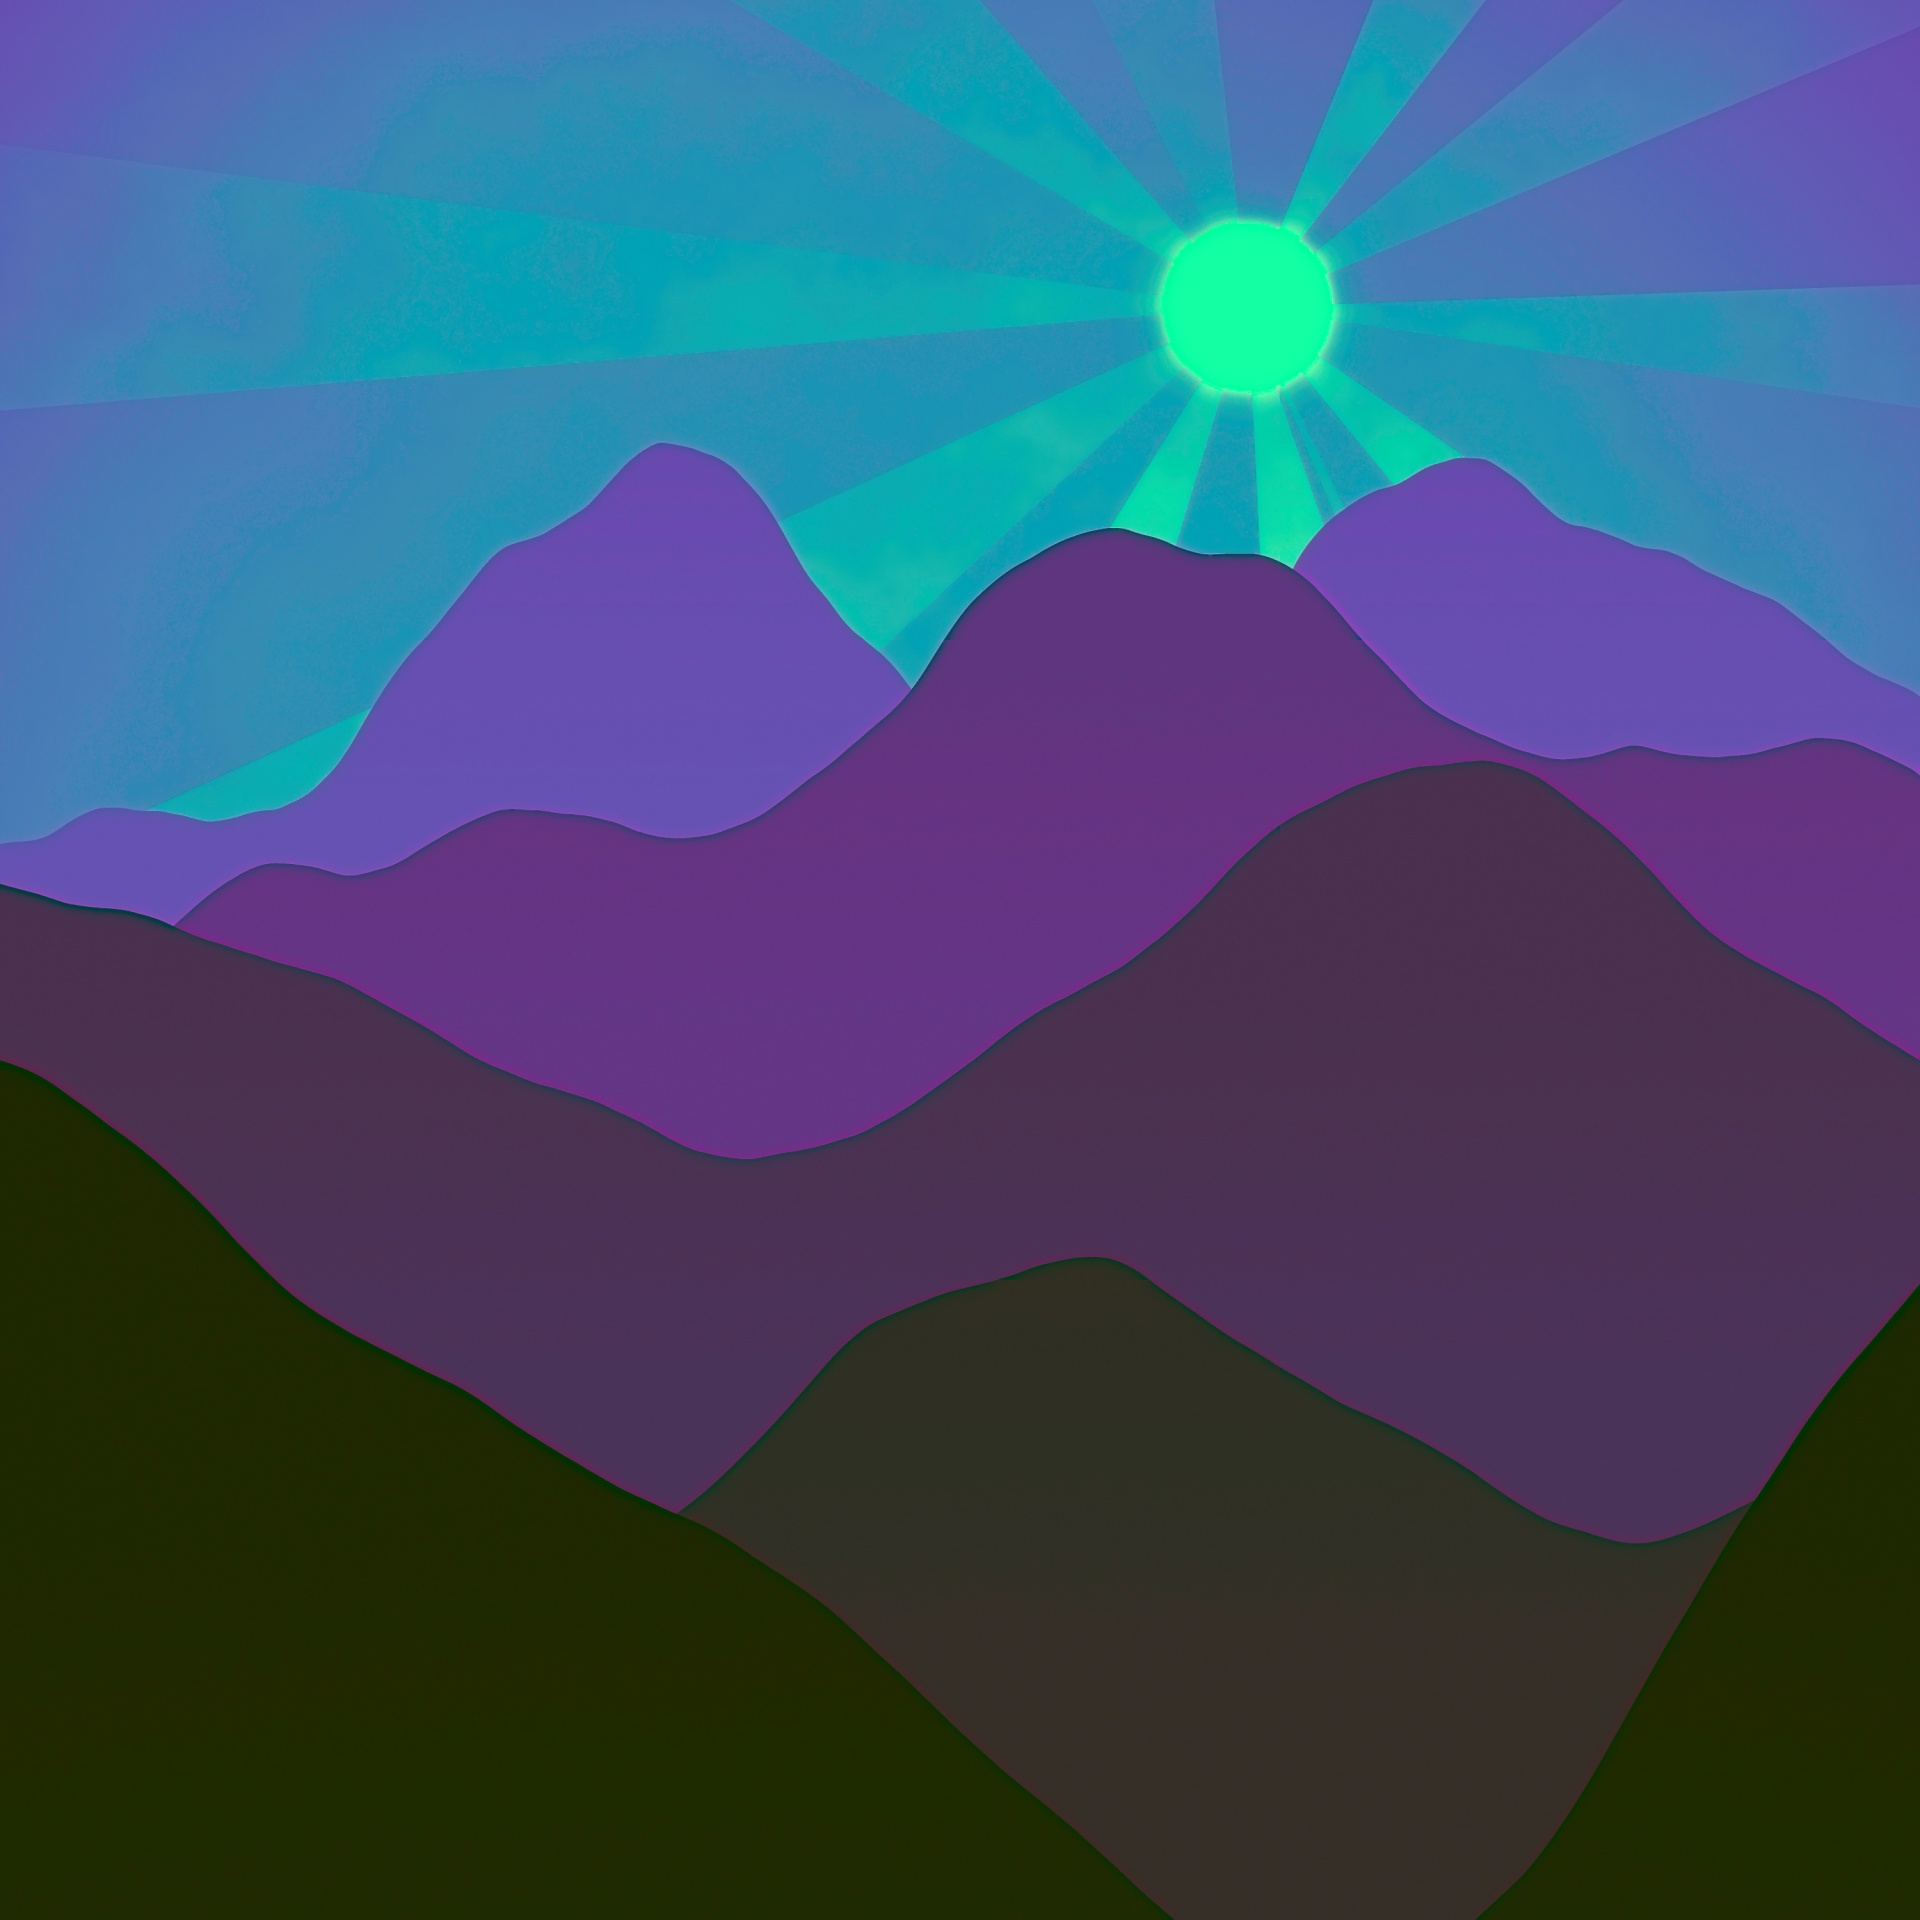 silhouetted drawn mountain illustration with a sun with rays